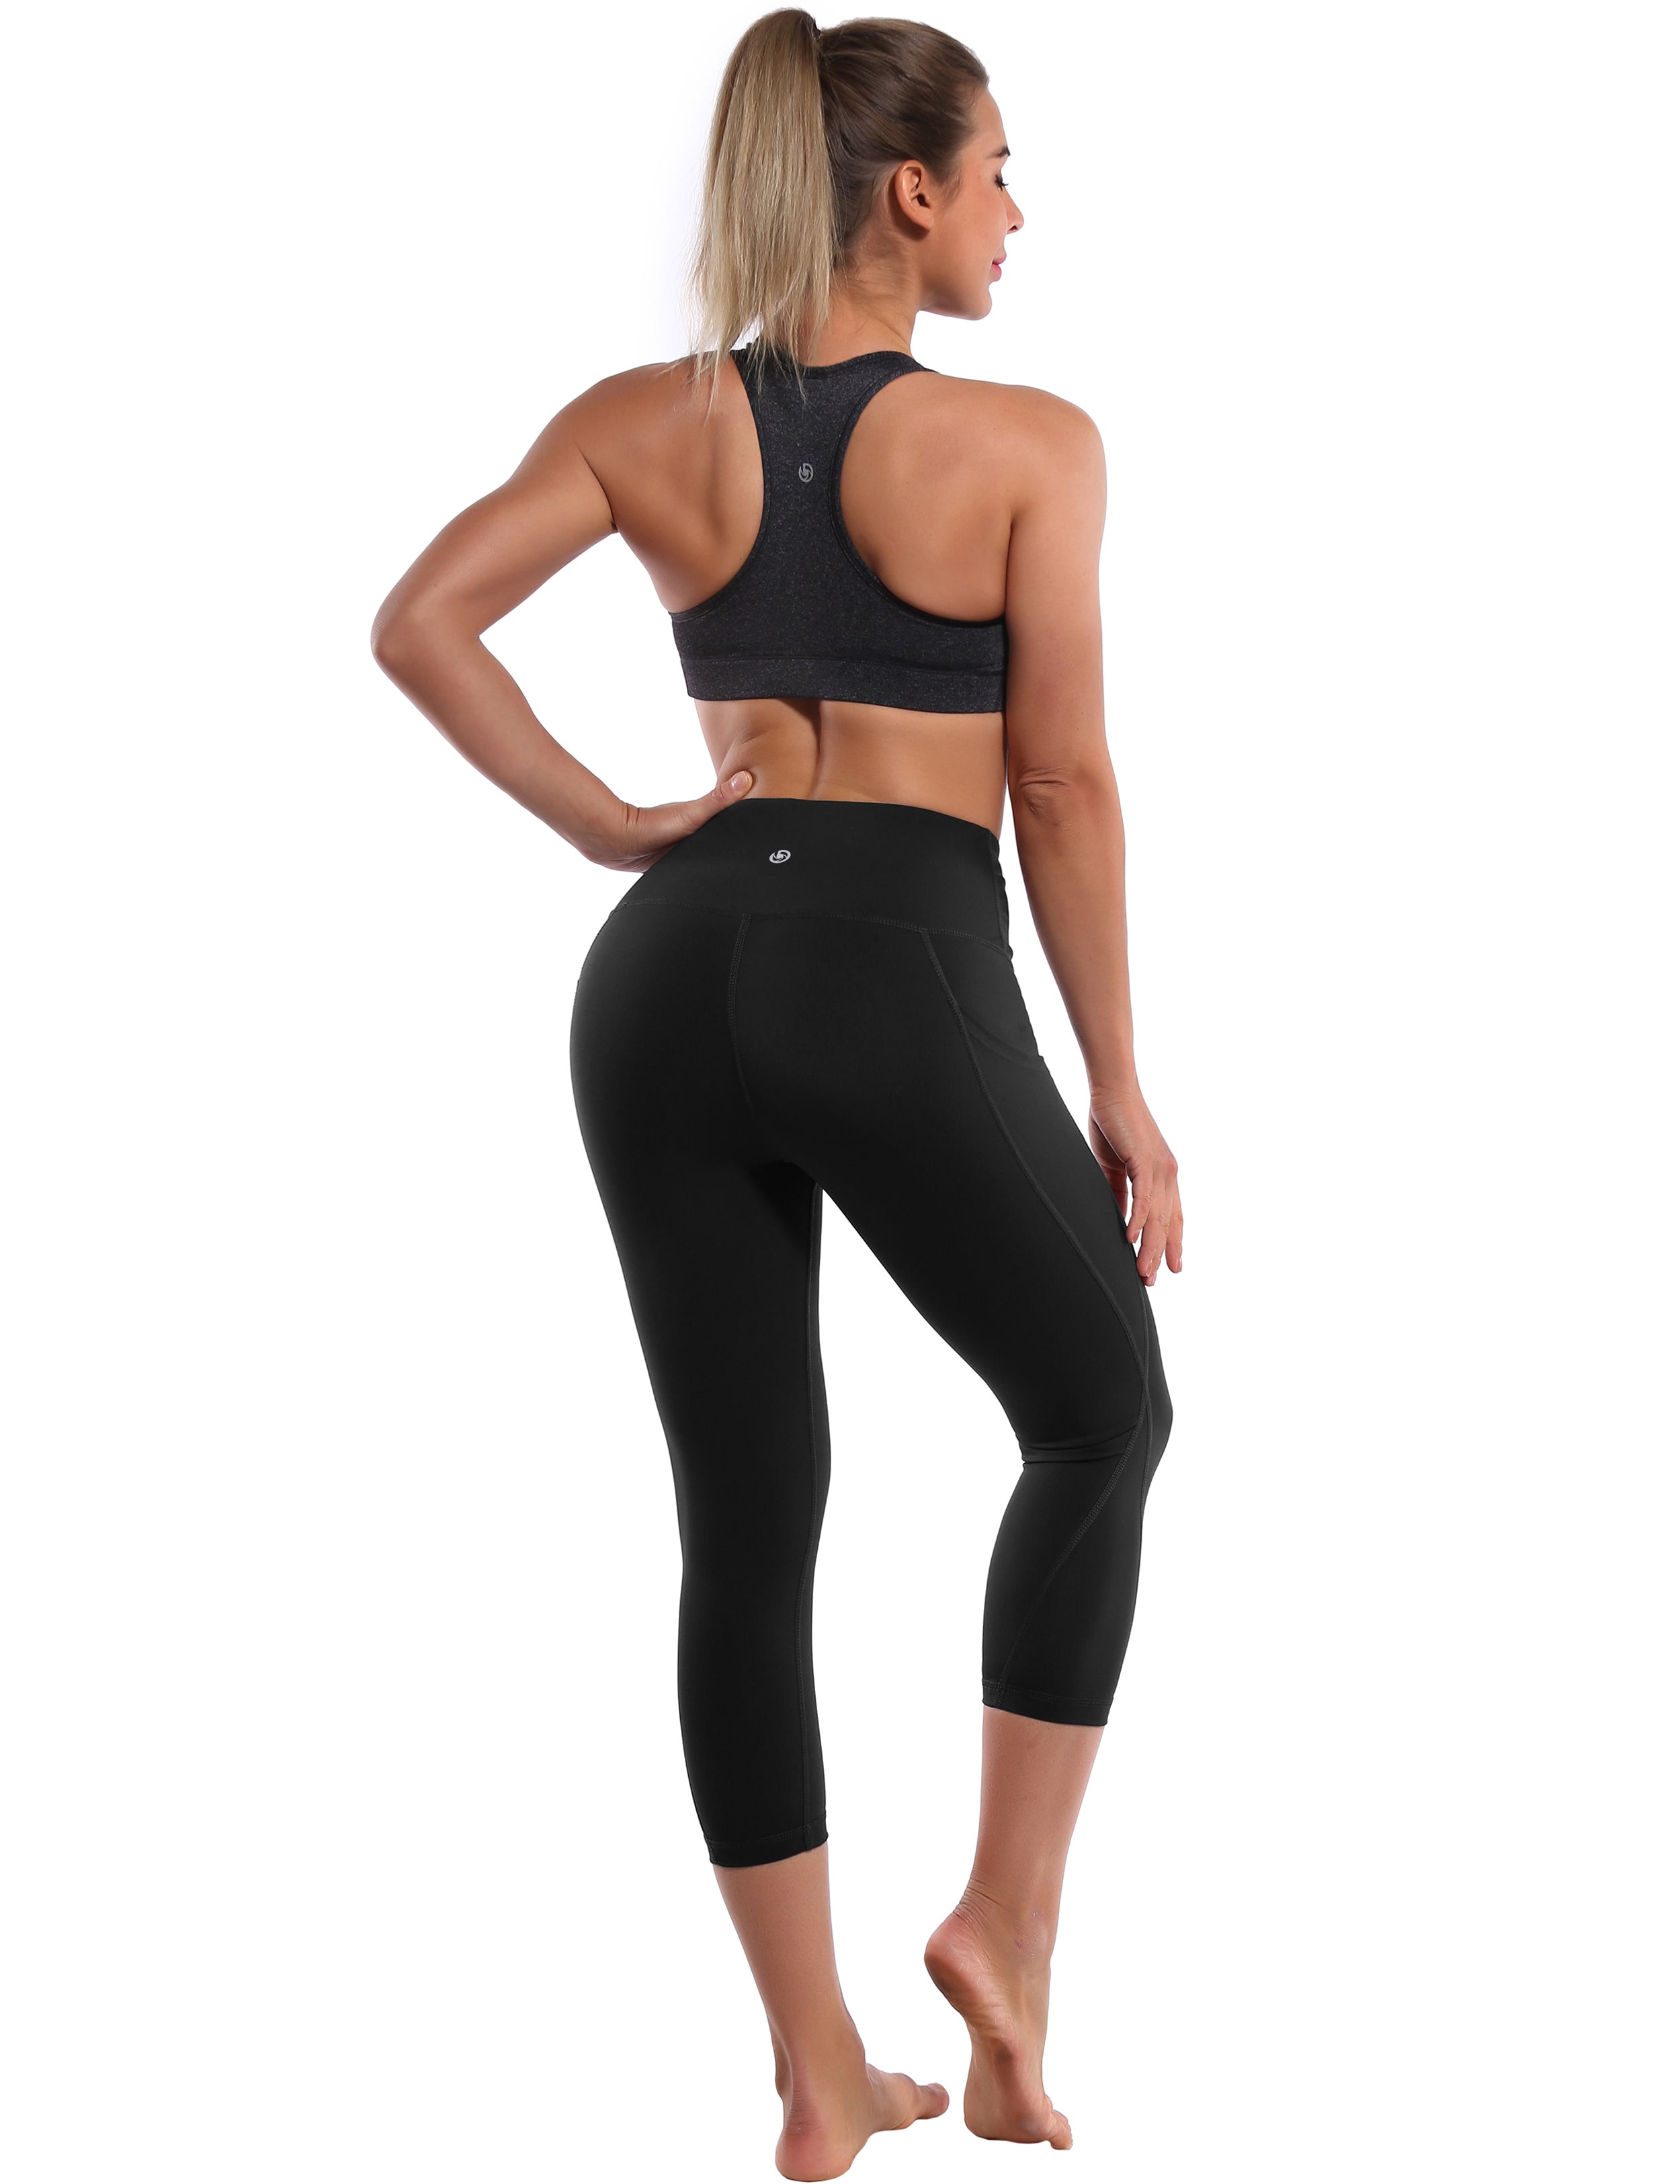 19" High Waist Crop Tight Capris black 75%Nylon/25%Spandex Fabric doesn't attract lint easily 4-way stretch No see-through Moisture-wicking Tummy control Inner pocket